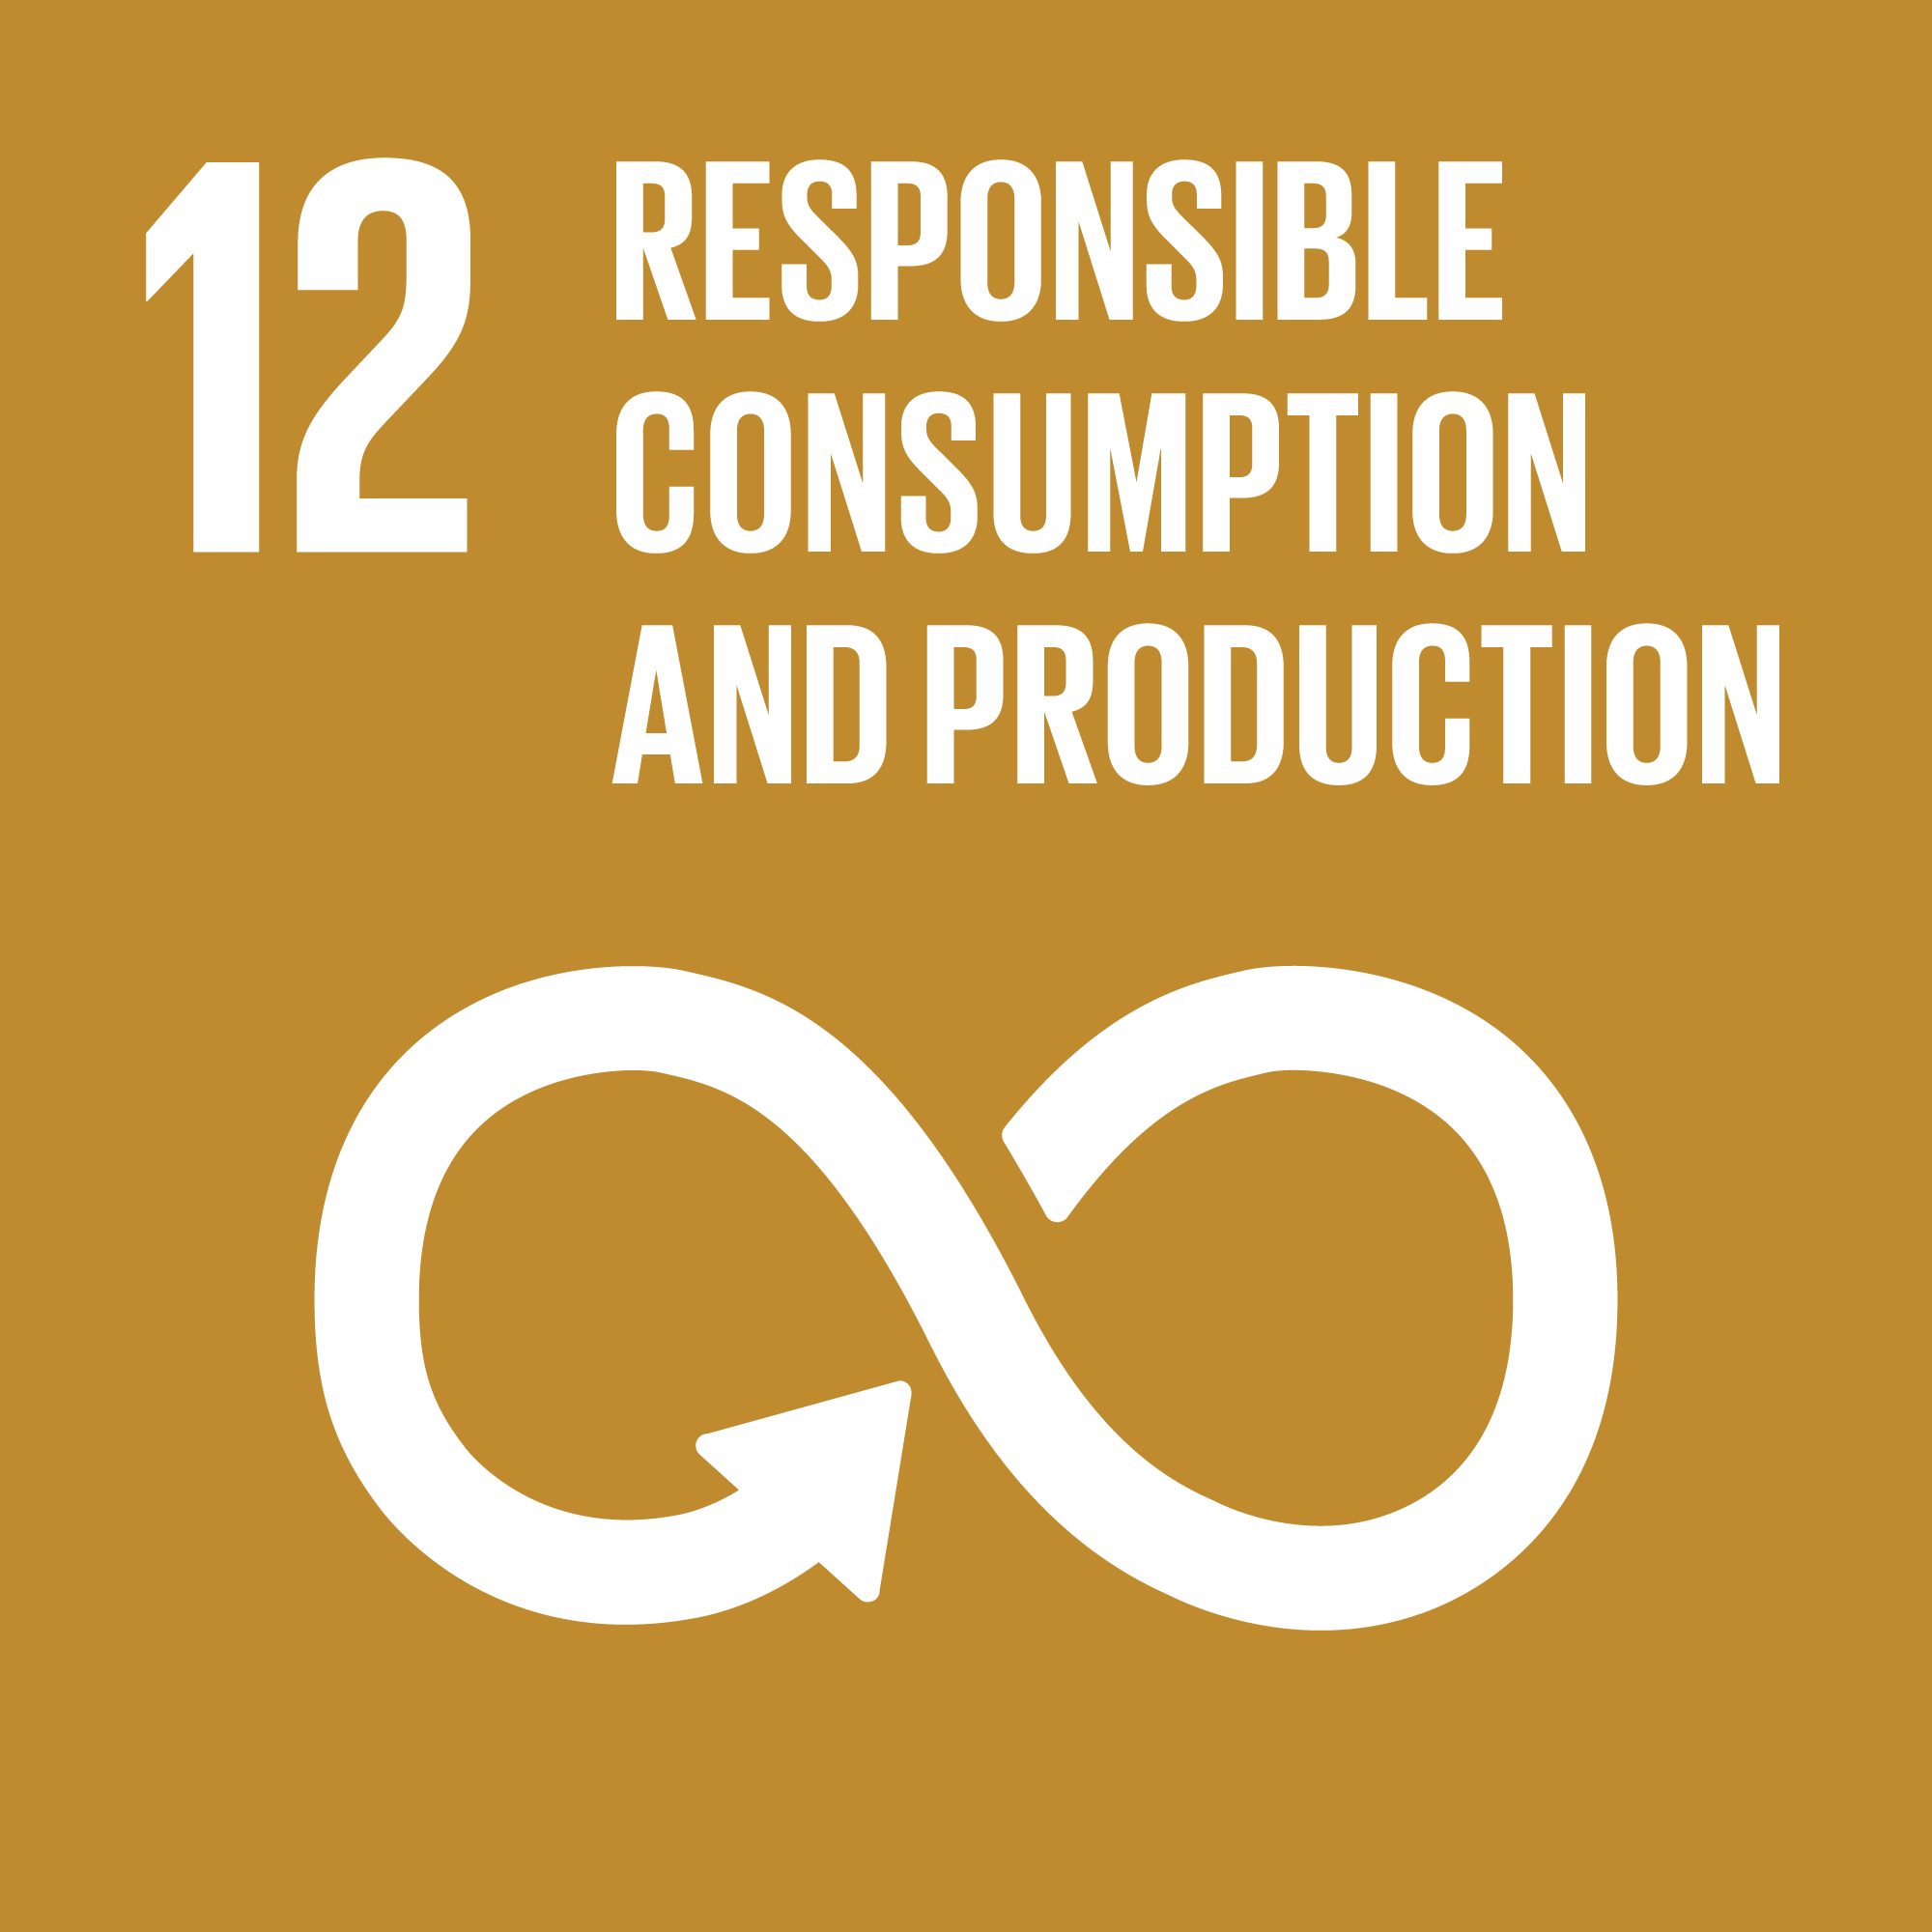 Sustainable Development Goal 12: Responsible Consumption and Production